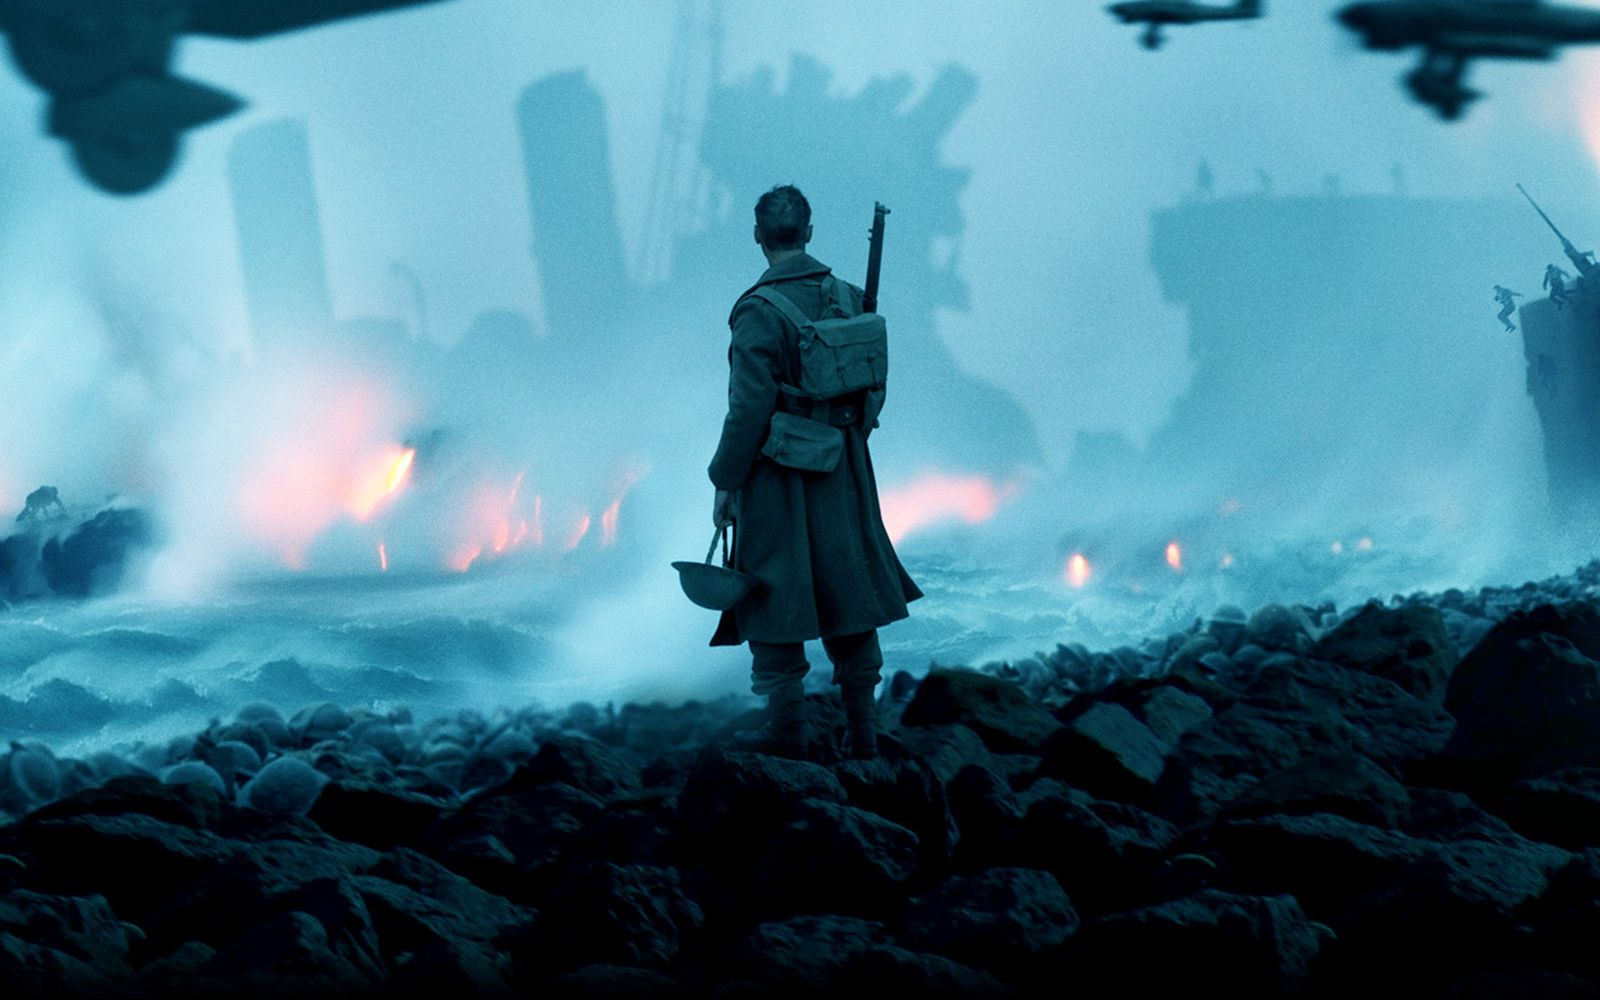 Take A Look At The New Explosive Dunkirk Trailer